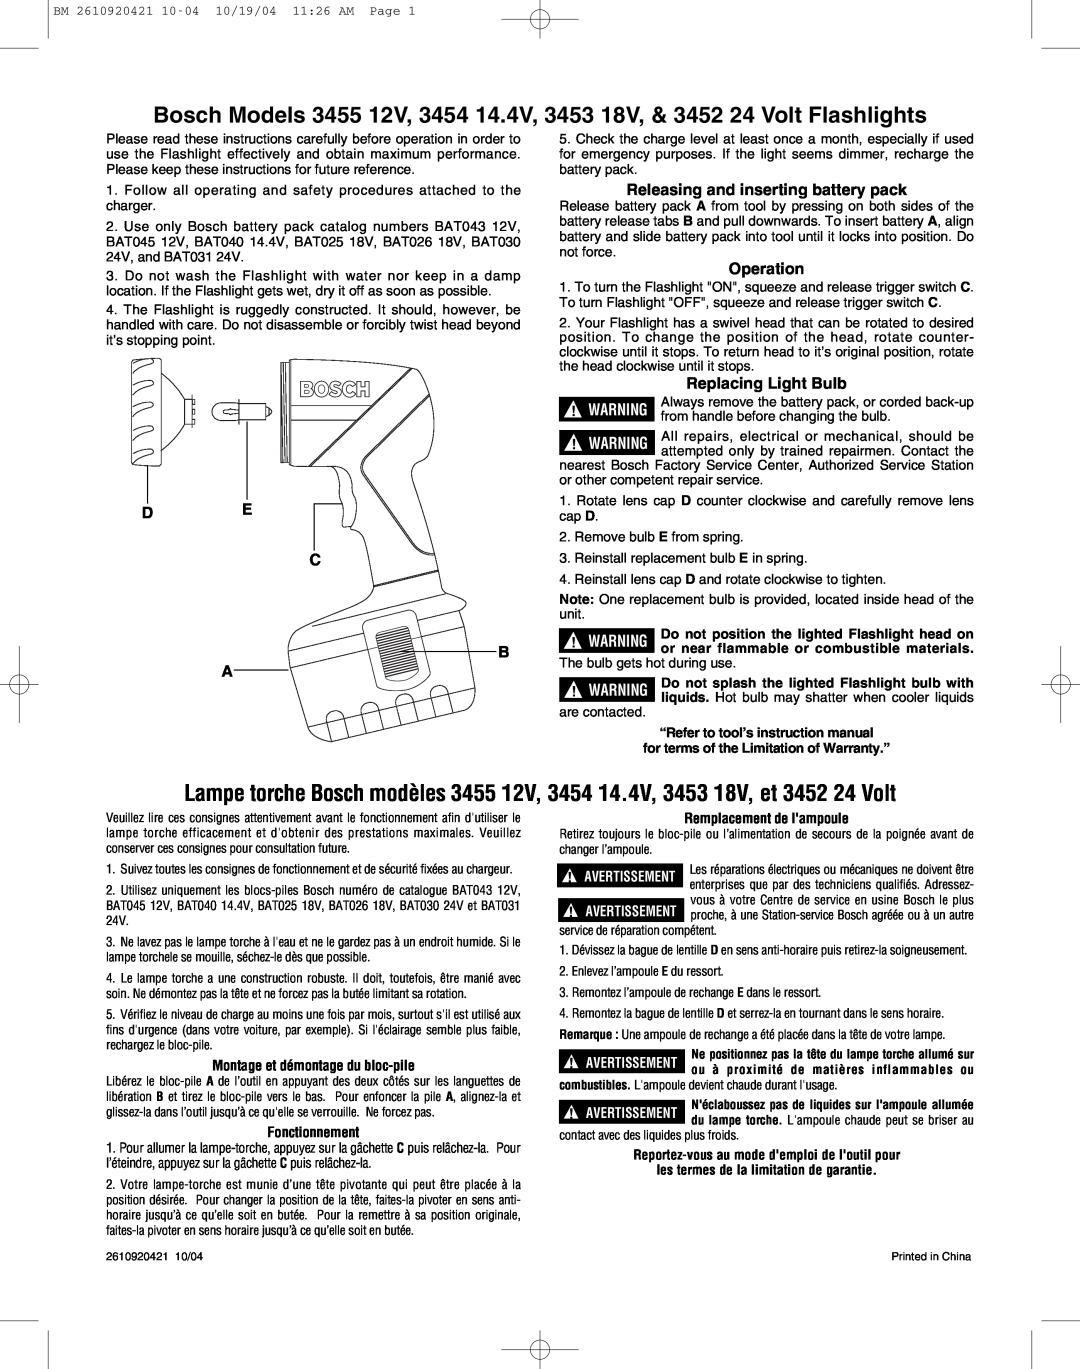 Bosch Appliances 3455 12V instruction manual D E C B A, Releasing and inserting battery pack, Operation, Fonctionnement 